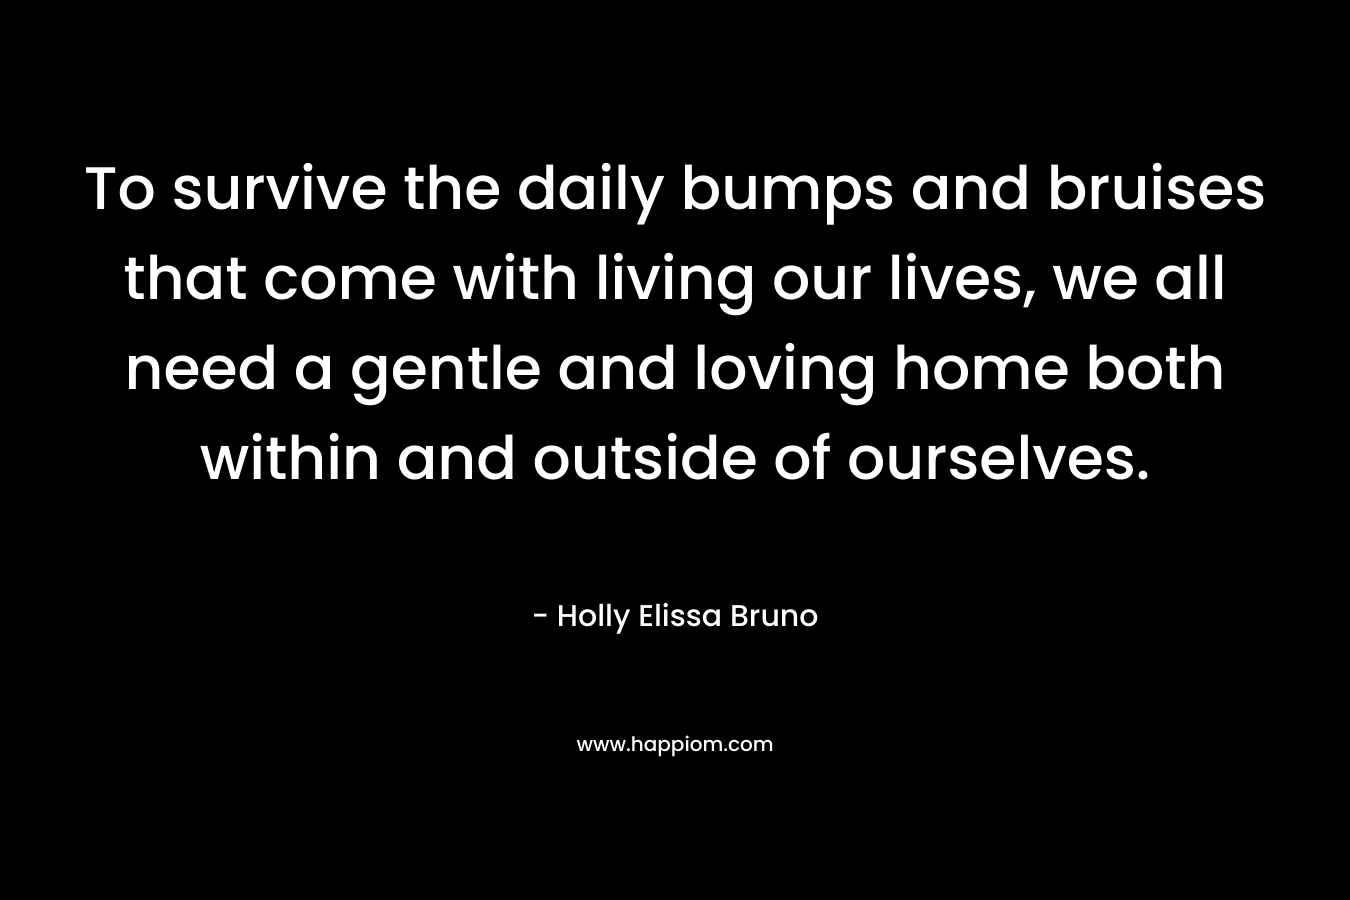 To survive the daily bumps and bruises that come with living our lives, we all need a gentle and loving home both within and outside of ourselves. – Holly Elissa Bruno